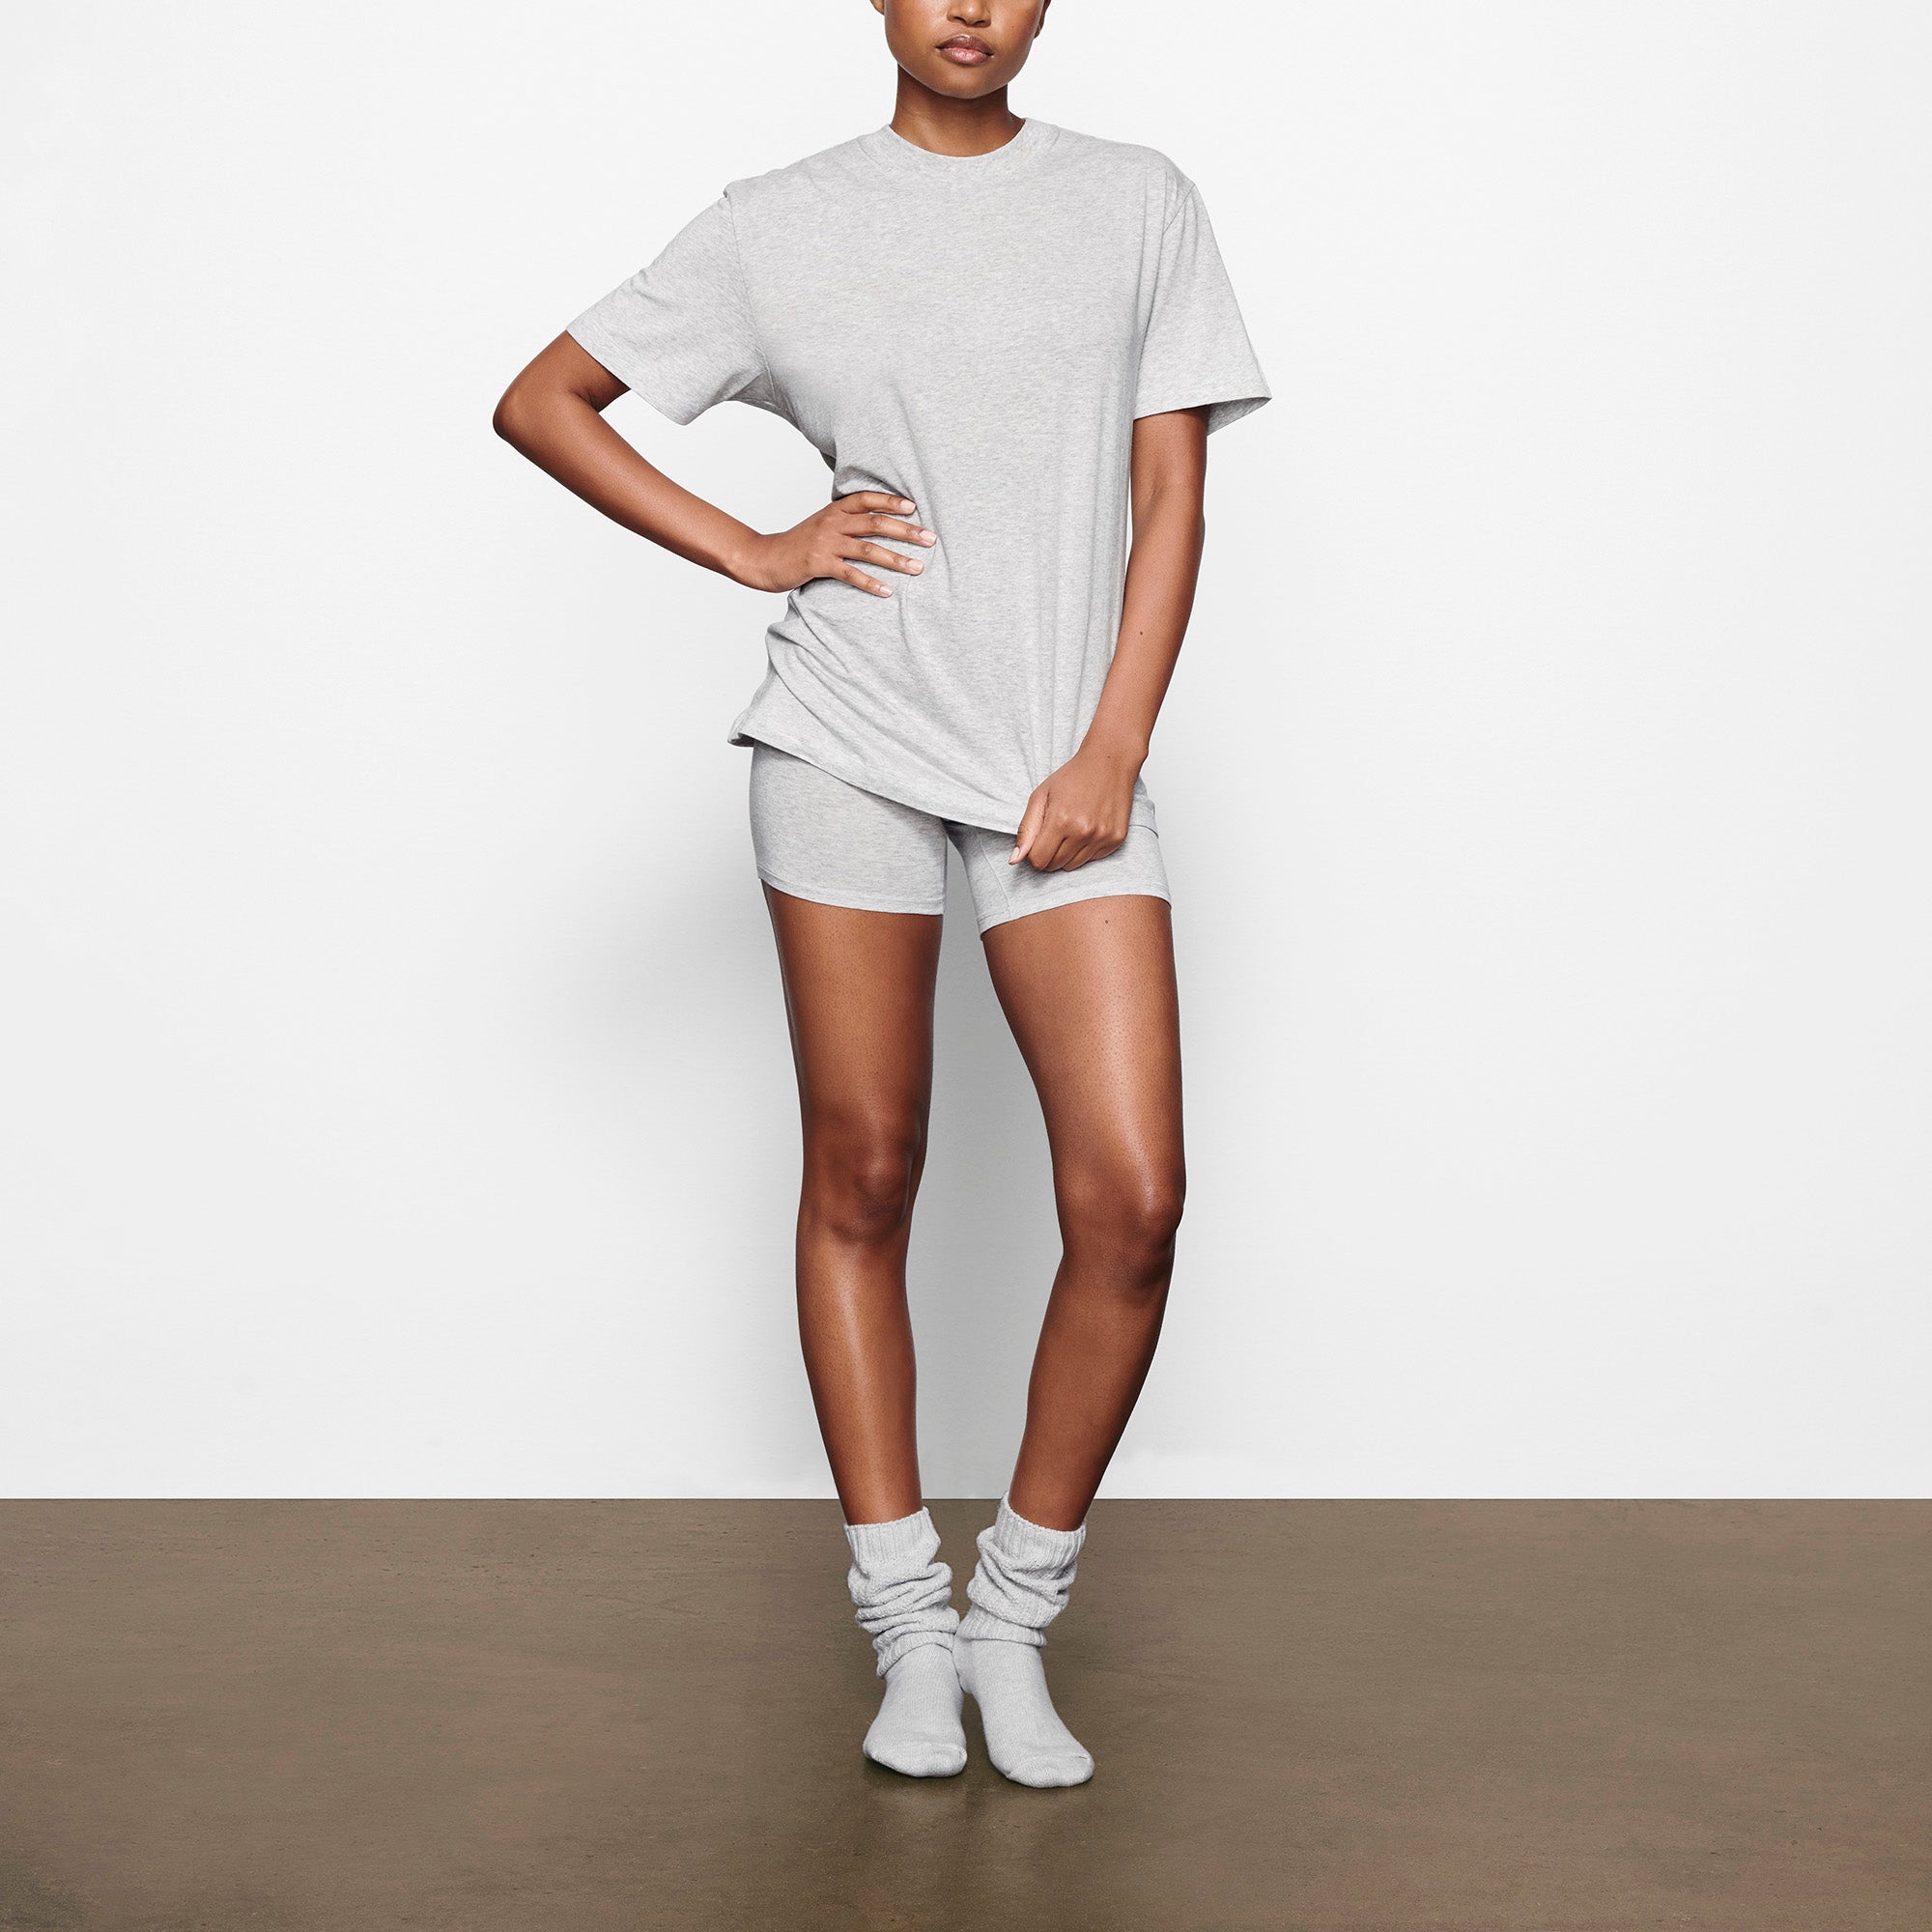 SKIMS - Inspired by your boyfriend's favorite tee, the Boyfriend T-Shirt is  perfectly oversized and made for all day, every day wear. Shop Boyfriend  now in sizes XXS - 4X